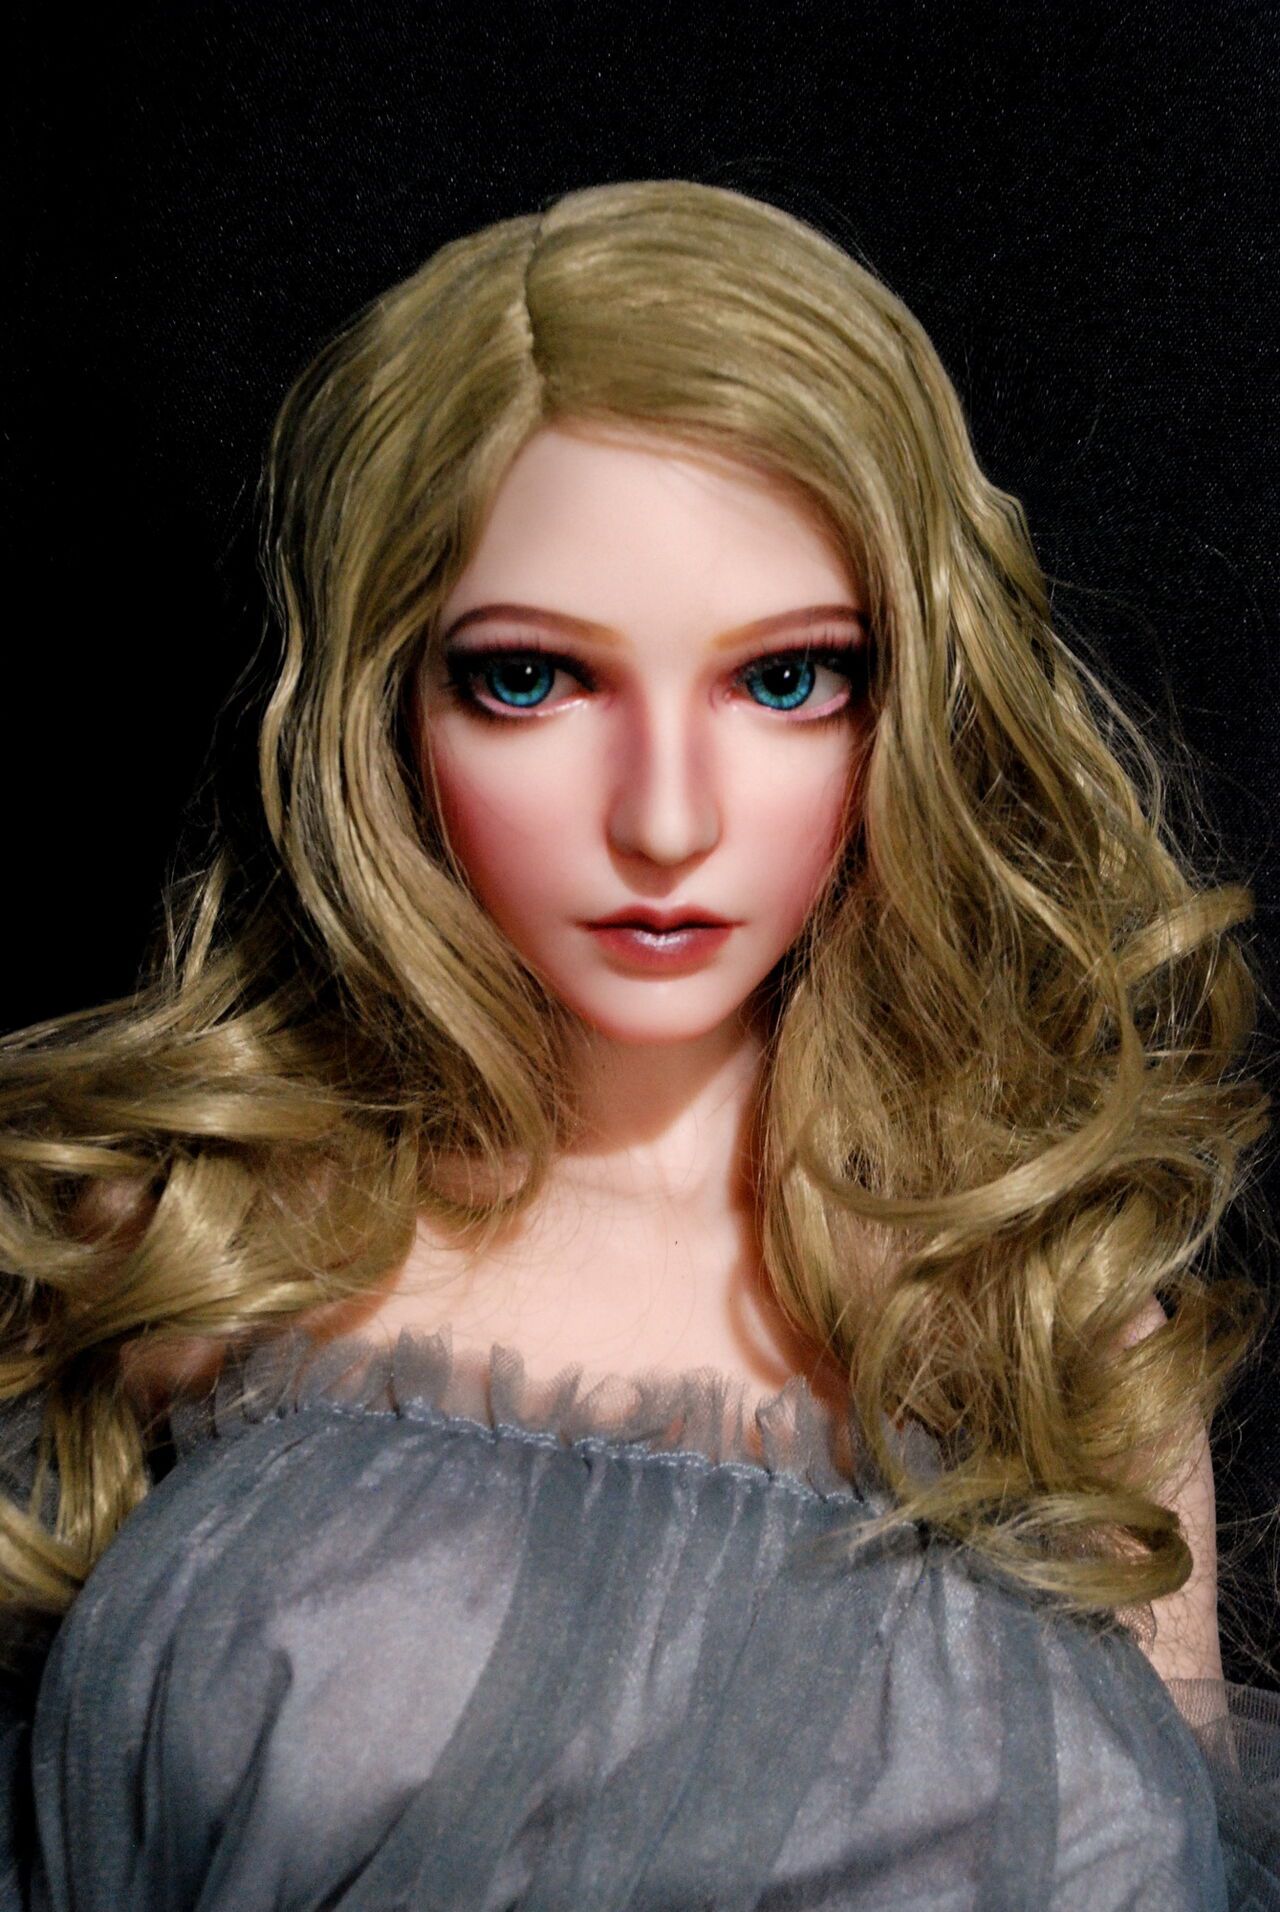 Elsa Babe - Warm 10% off, the overflowing gifts, and more! 2022.05.09 18